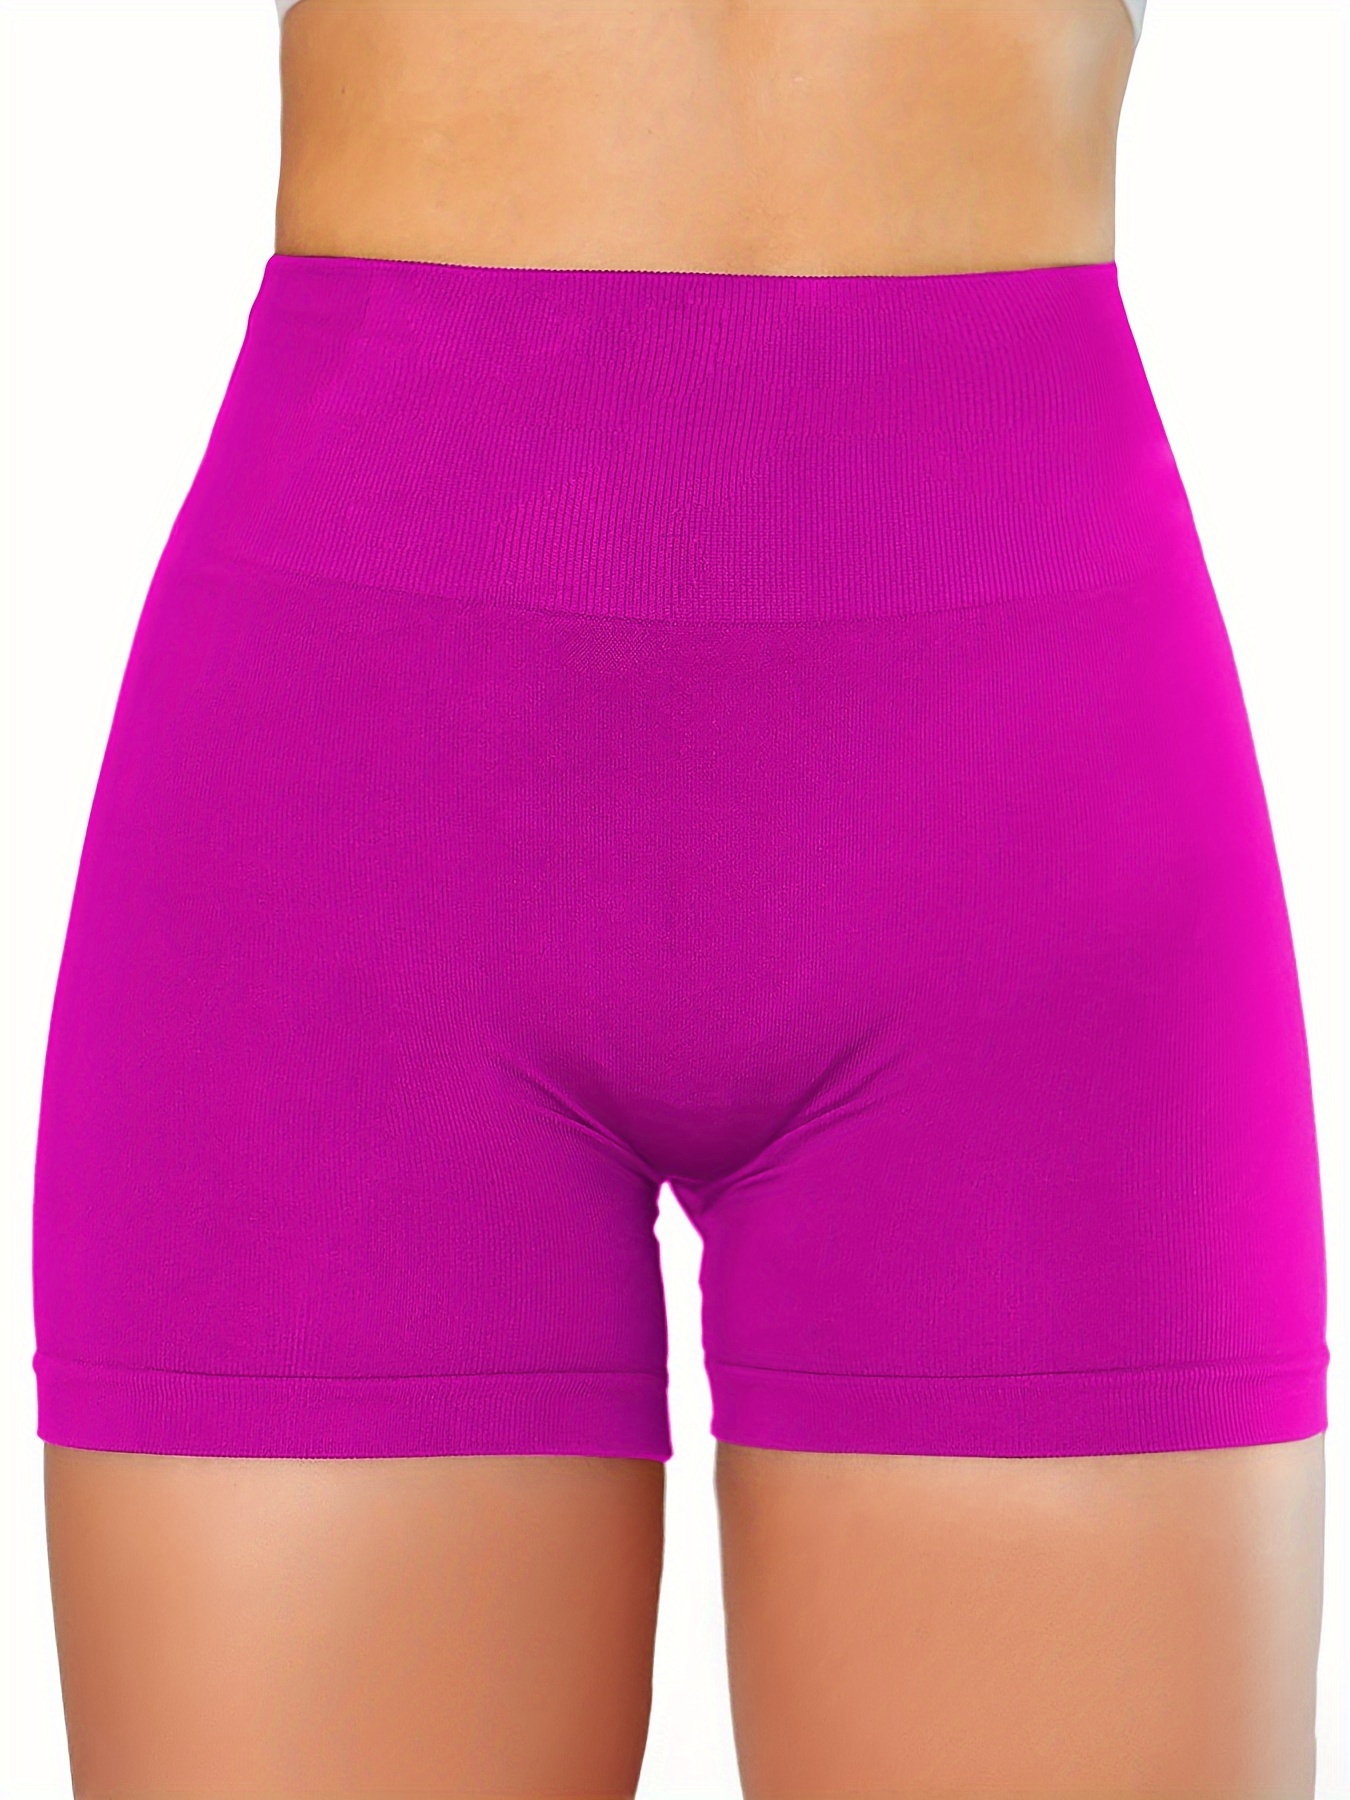 solid color quick drying yoga workout shorts high stretch sports running shorts womens activewear details 31